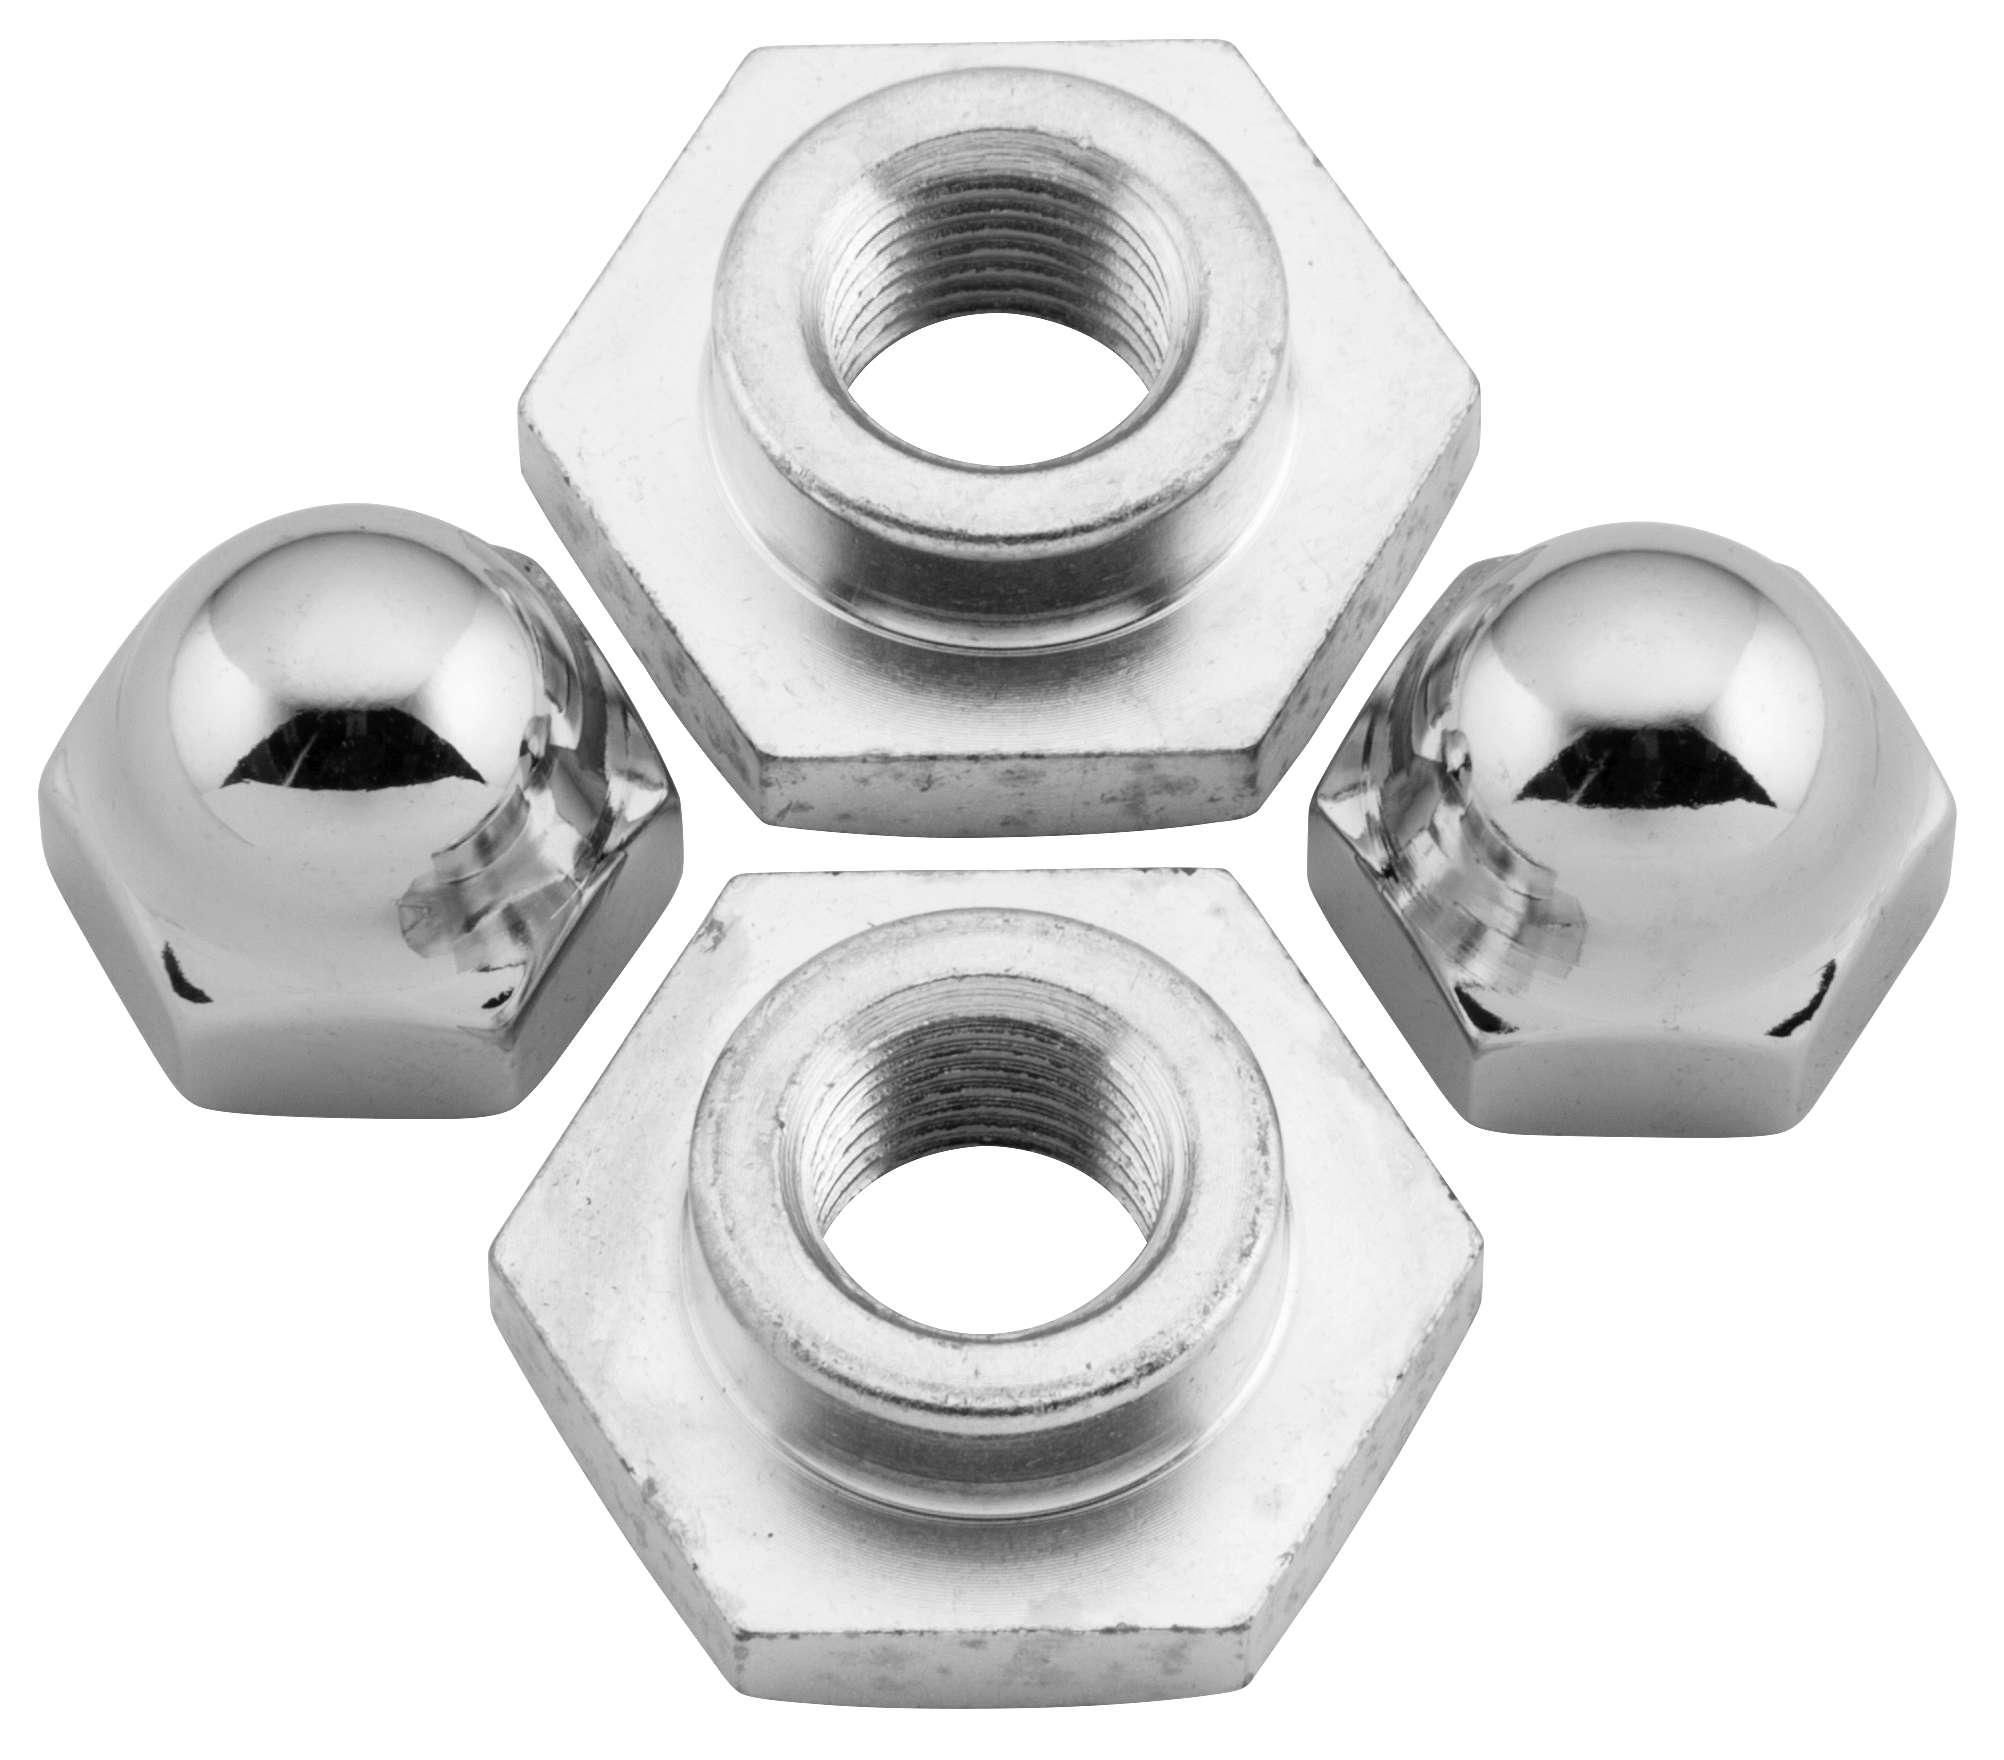 3QN9-COLONY-7613-2 Springer Fork Nut and Retainer Set